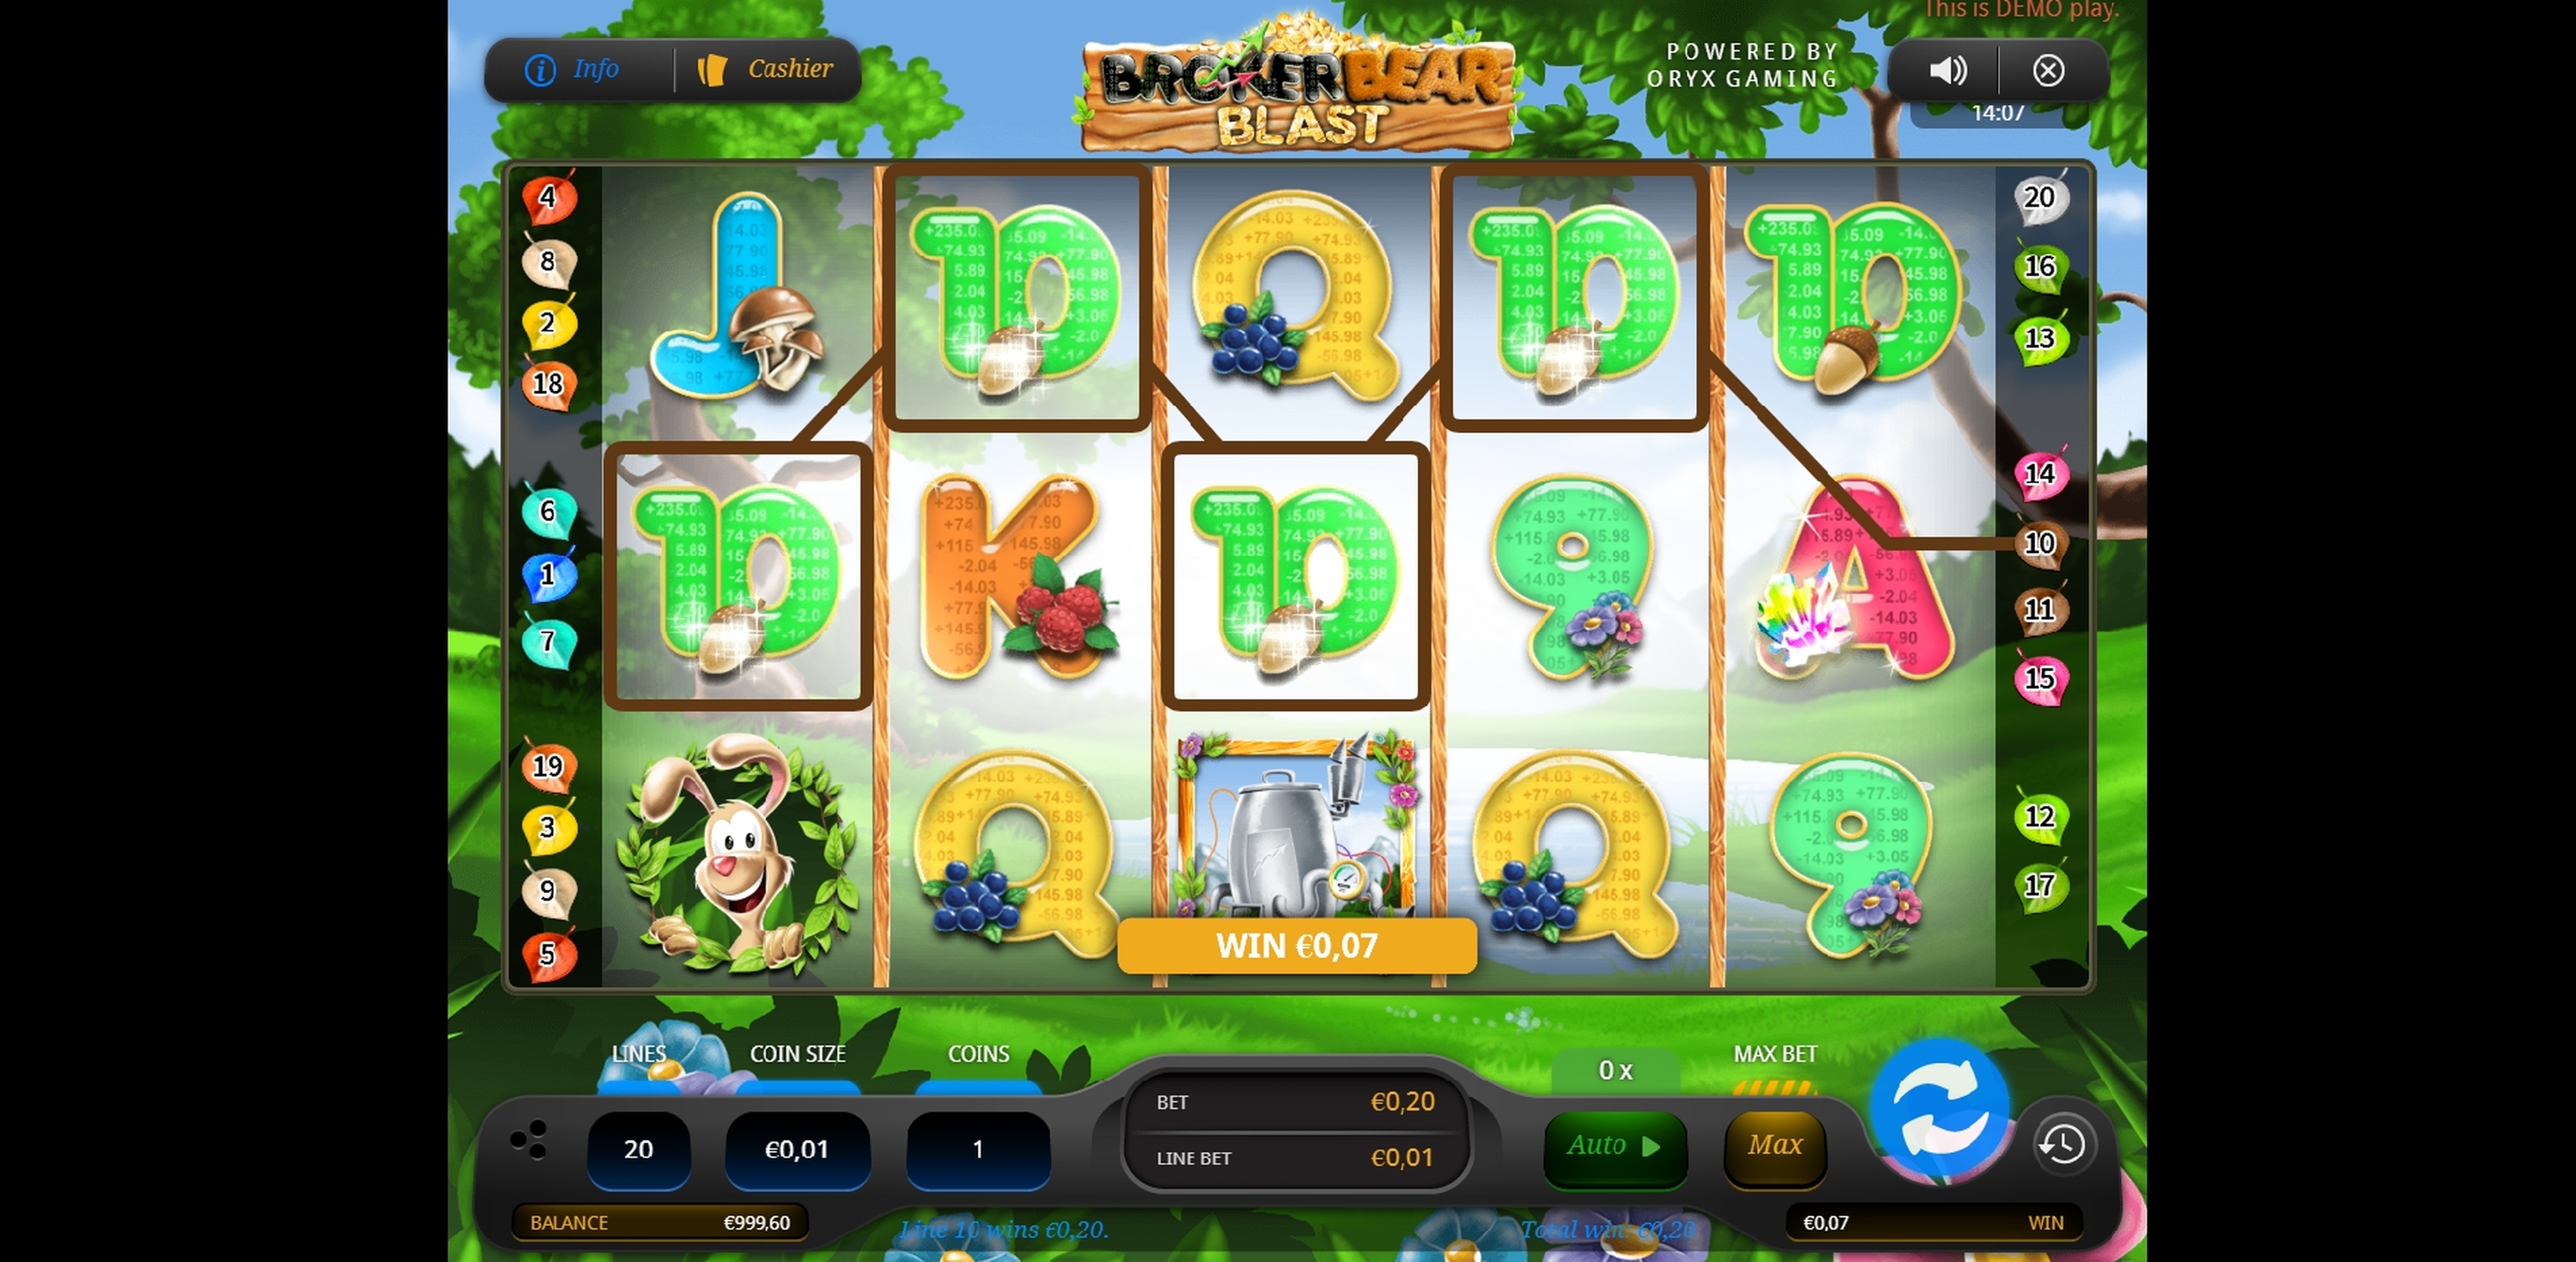 Win Money in Broker Bear Free Slot Game by Oryx Gaming